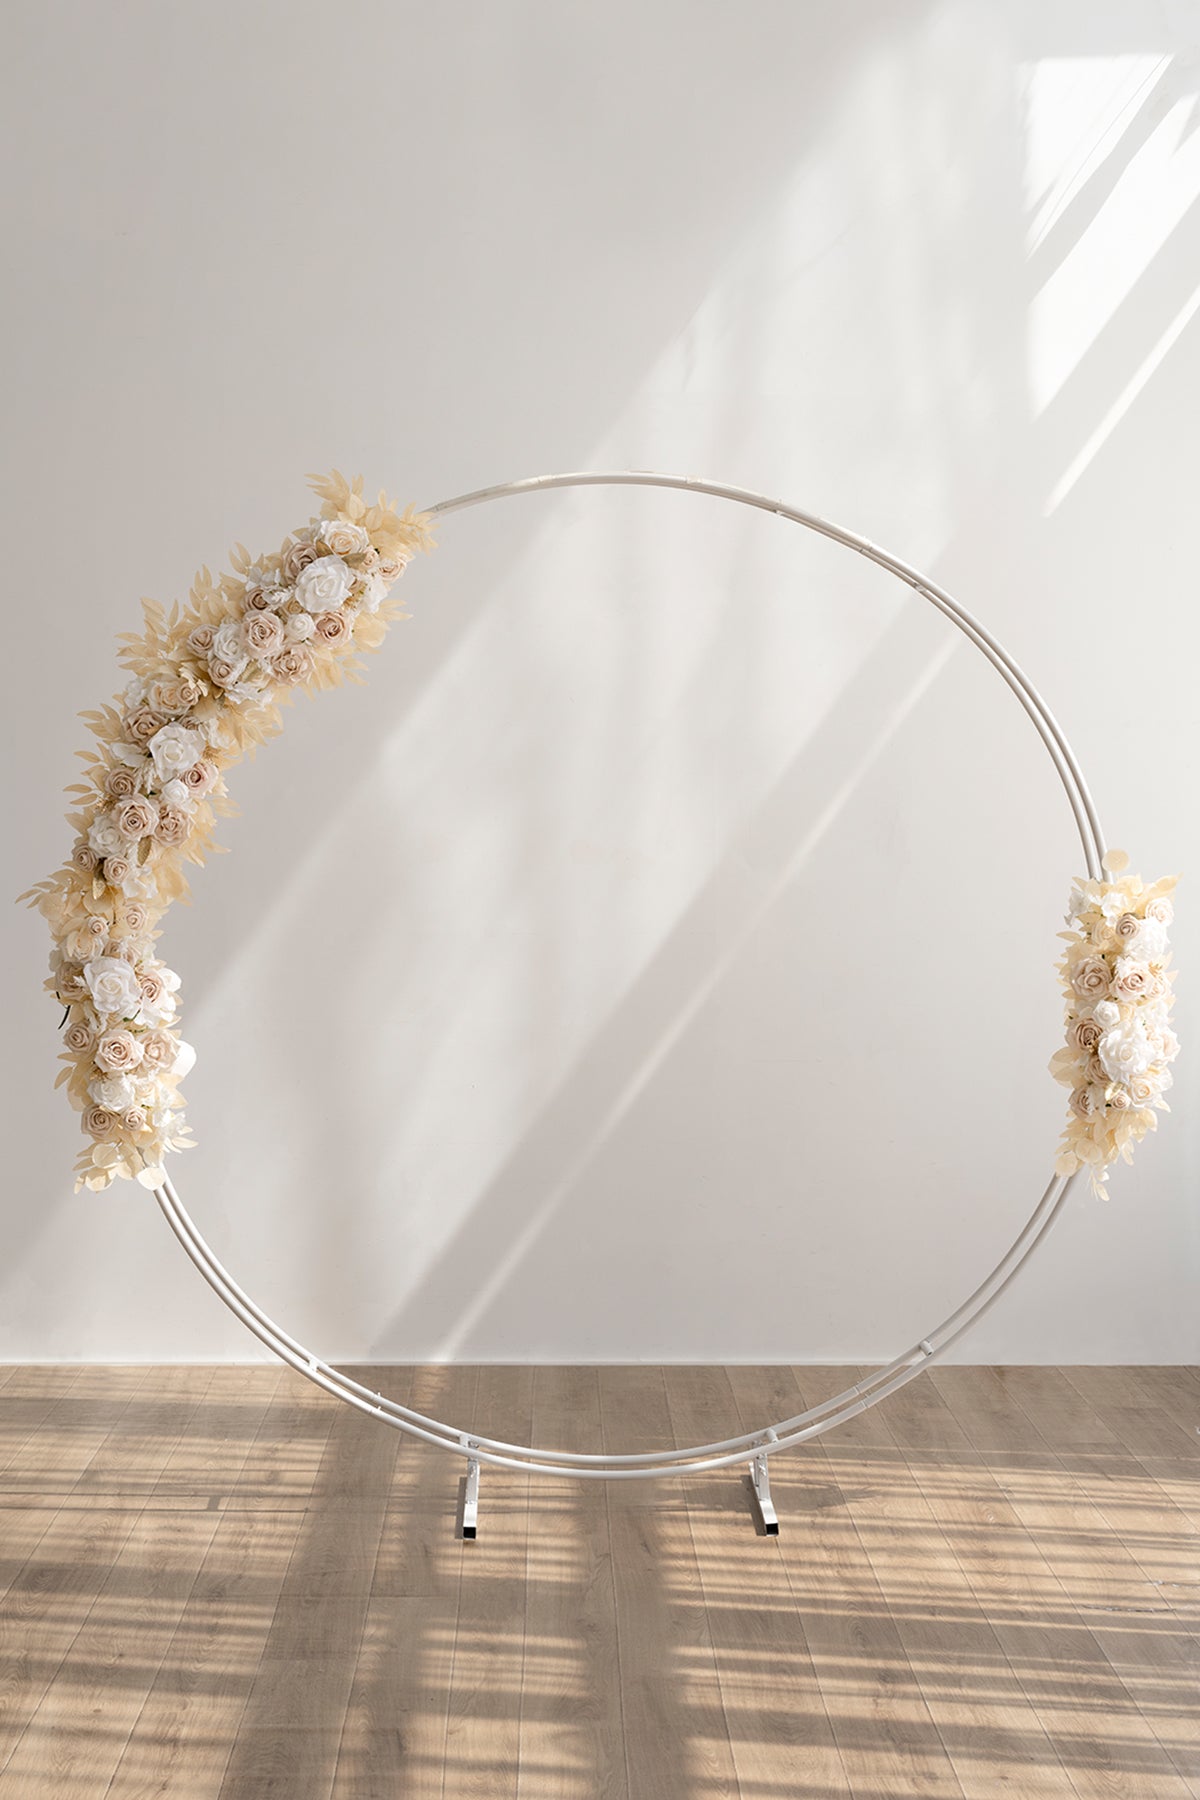 Flower Arrangements for Arch Decor in White & Beige | Clearance